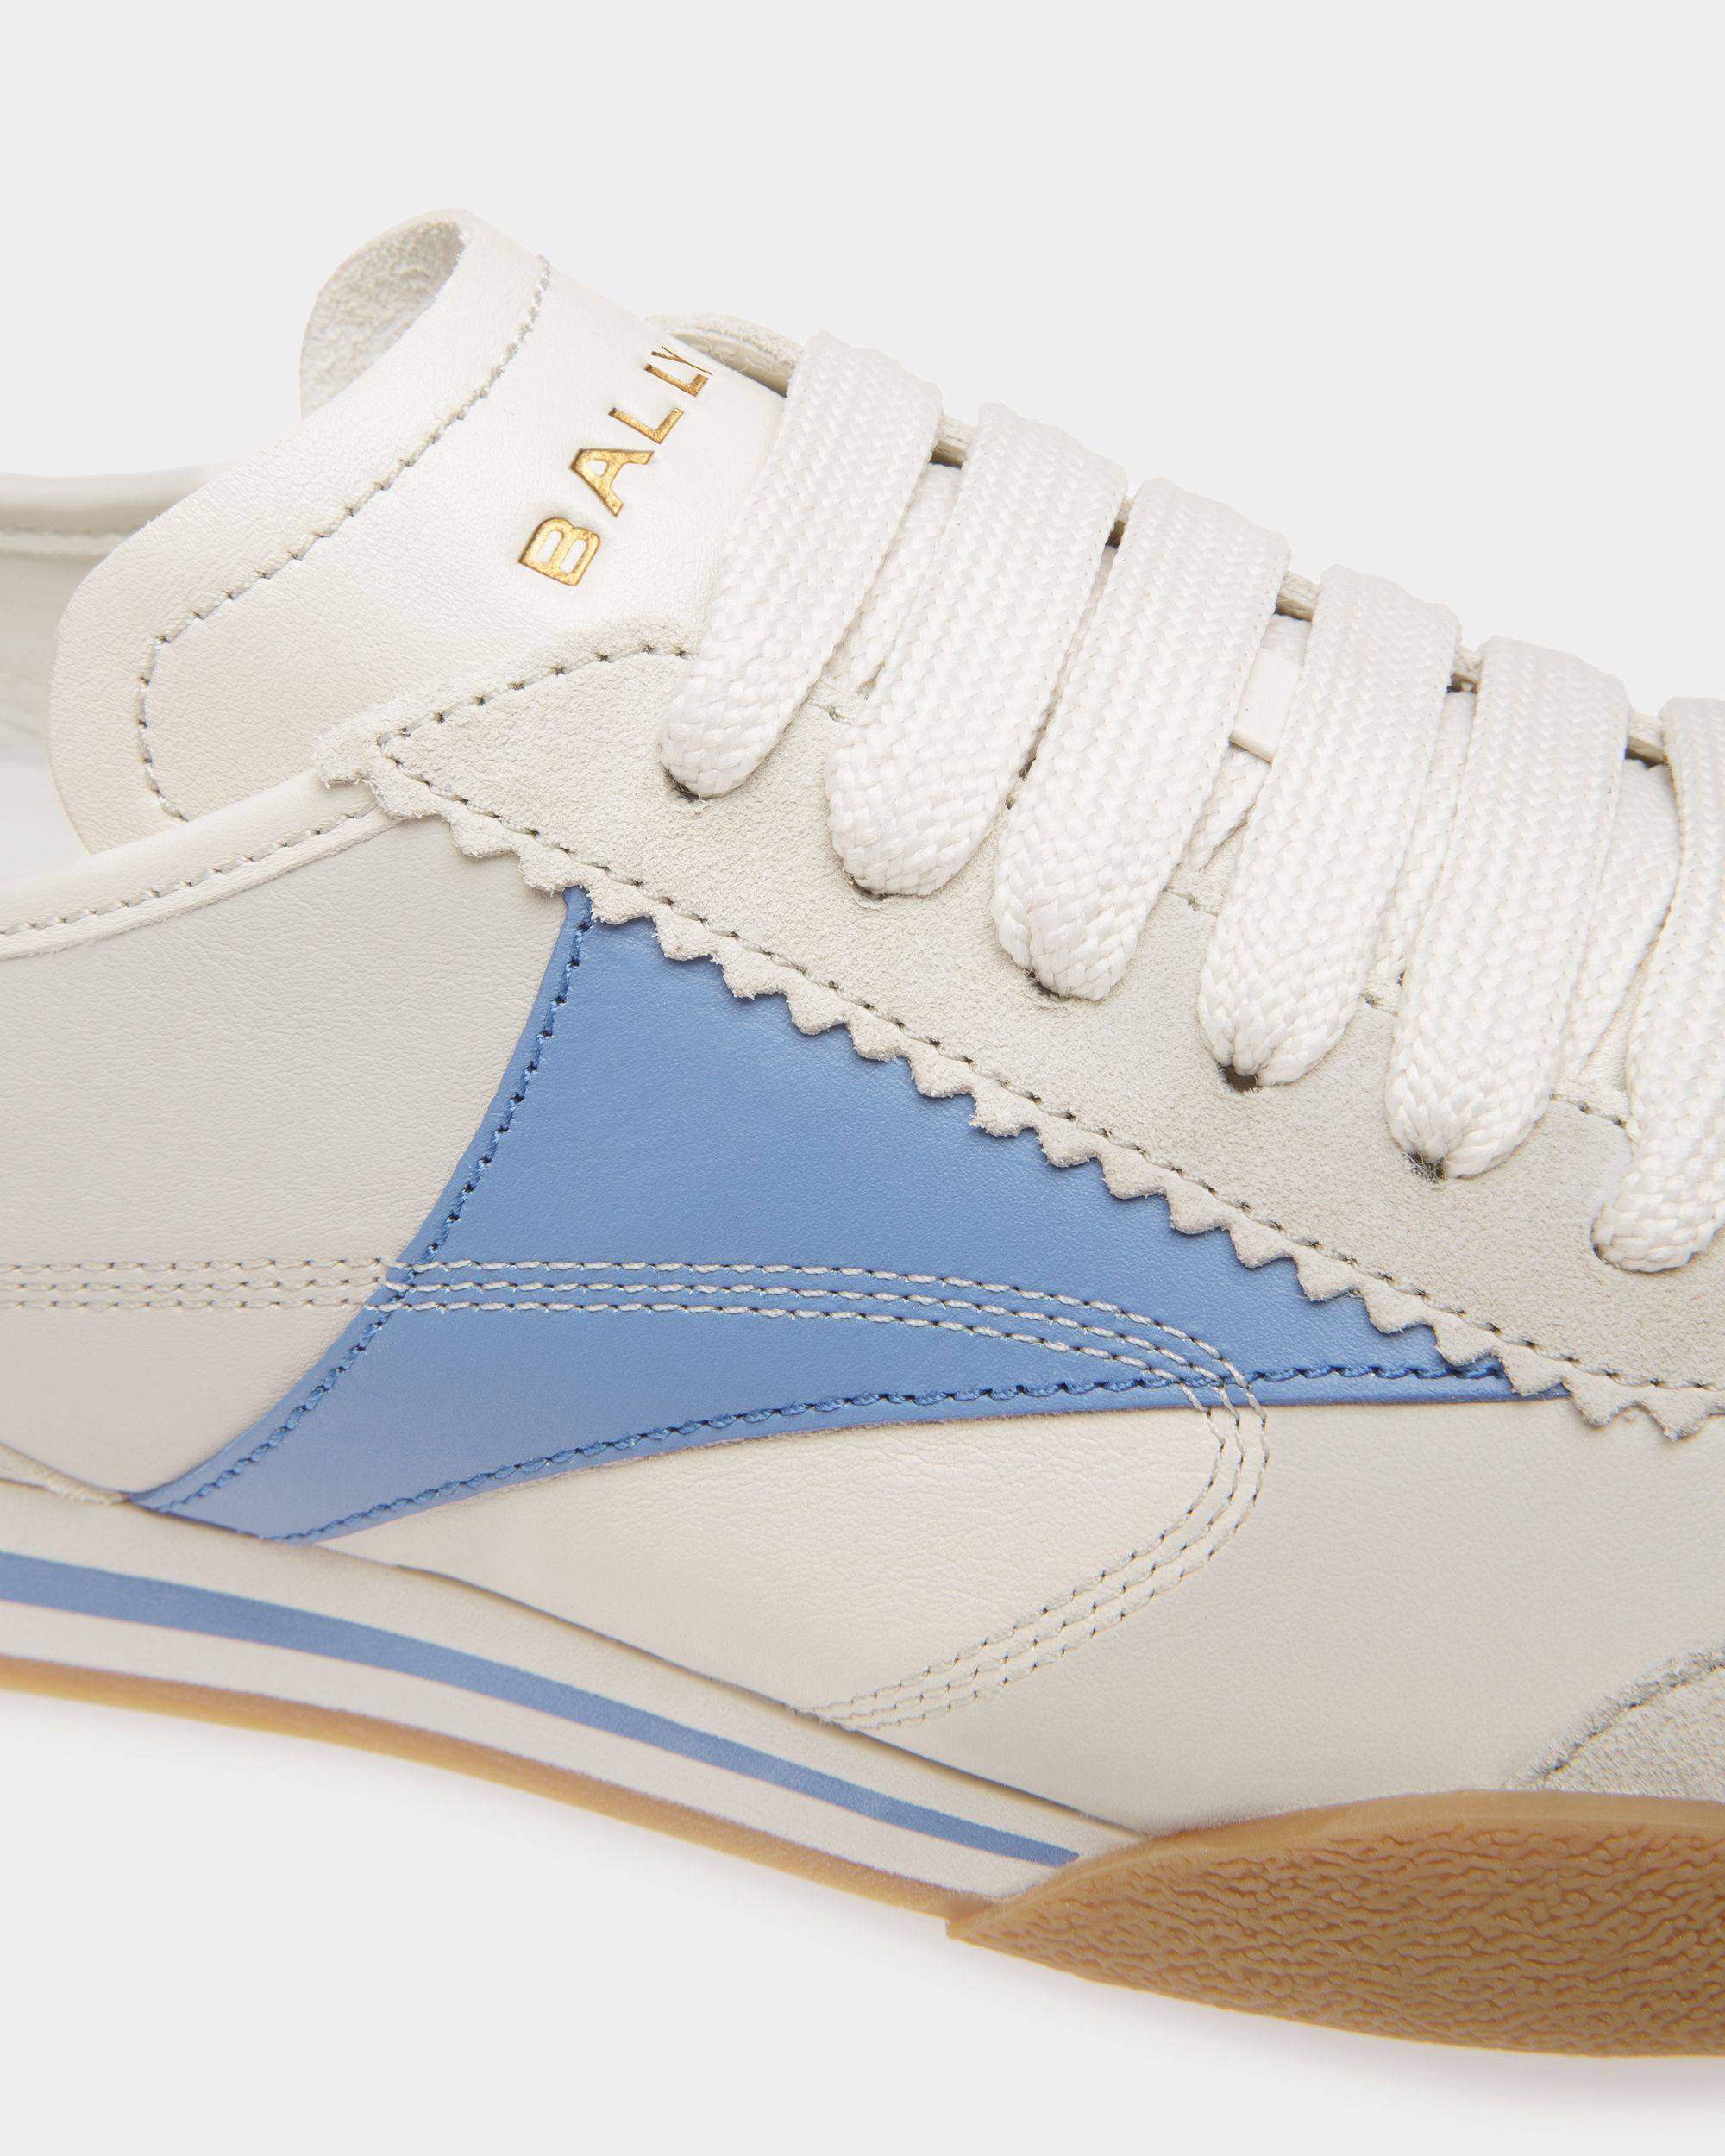 Sonney | Women's Sneakers | Dusty White And Black Leather | Bally | Still Life Detail